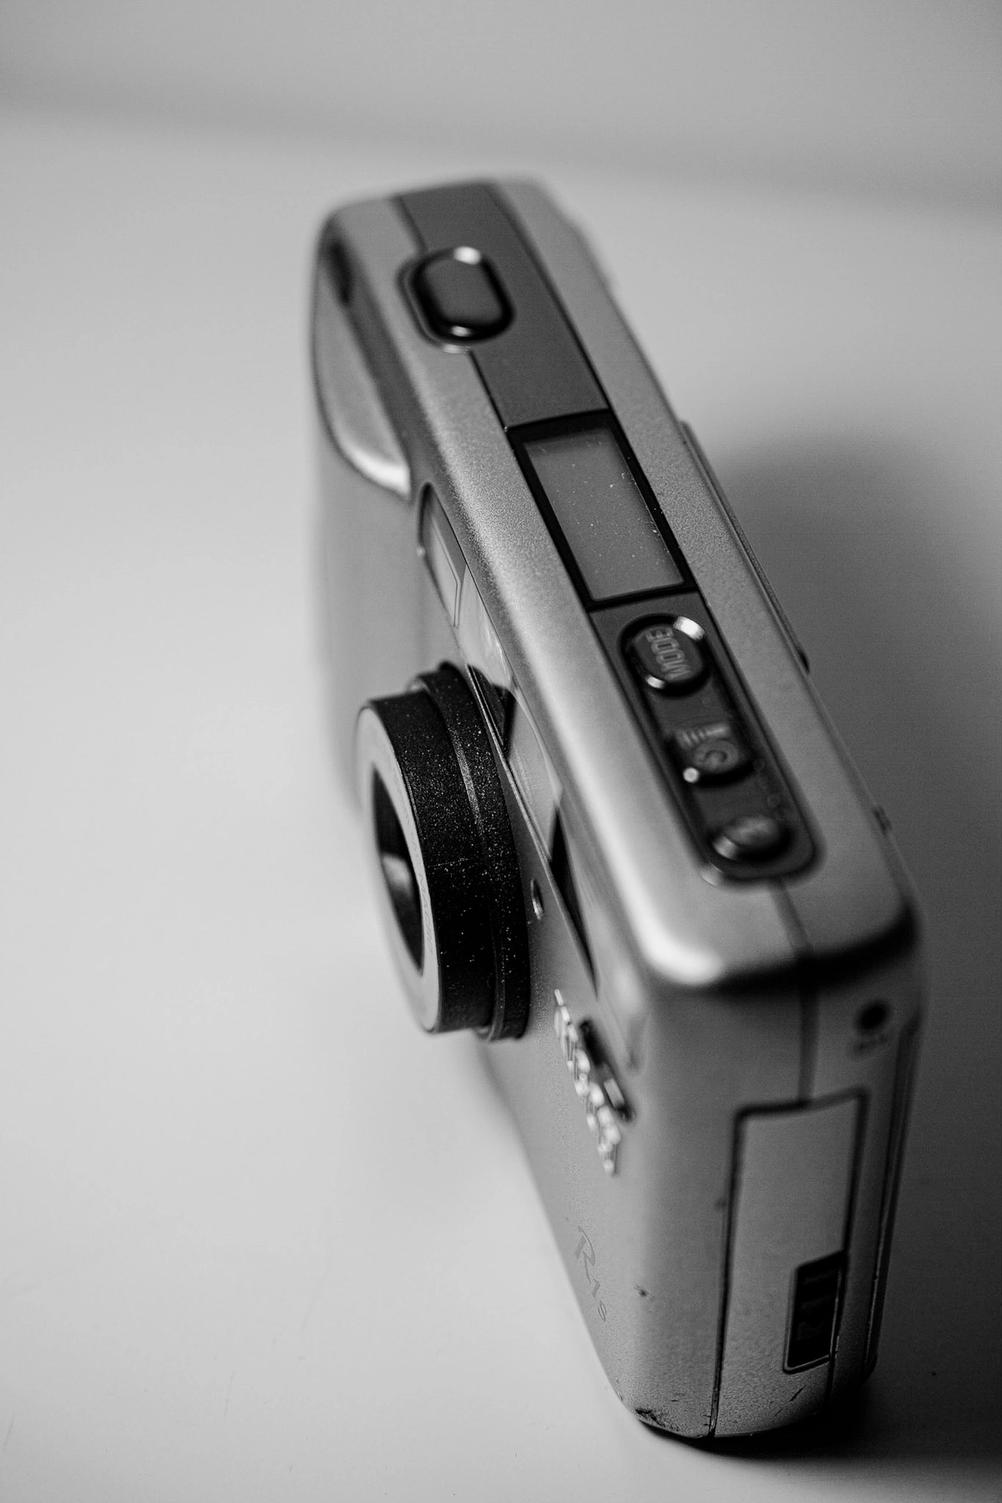 Photo of Ricoh R1S.